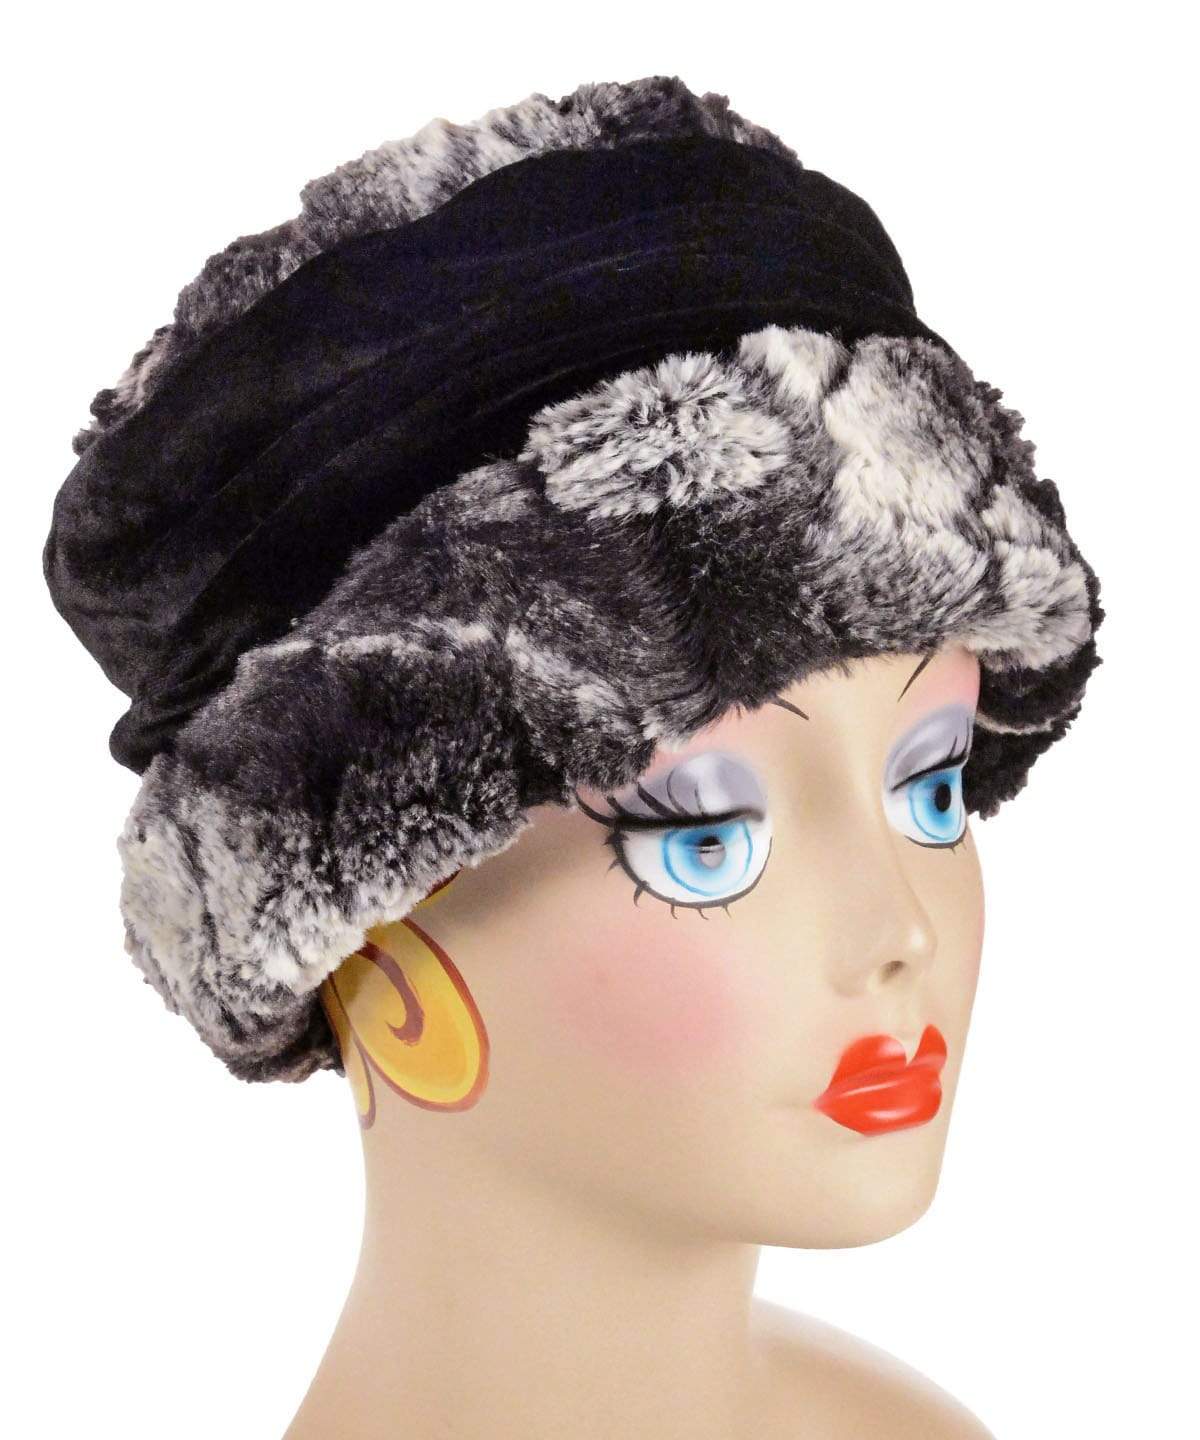 Ana Cloche Hat in Honey Badger Black and Cream Luxury Faux Fur with Black Velvet Band| Handmade in Seattle WA| Pandemonium Millinery